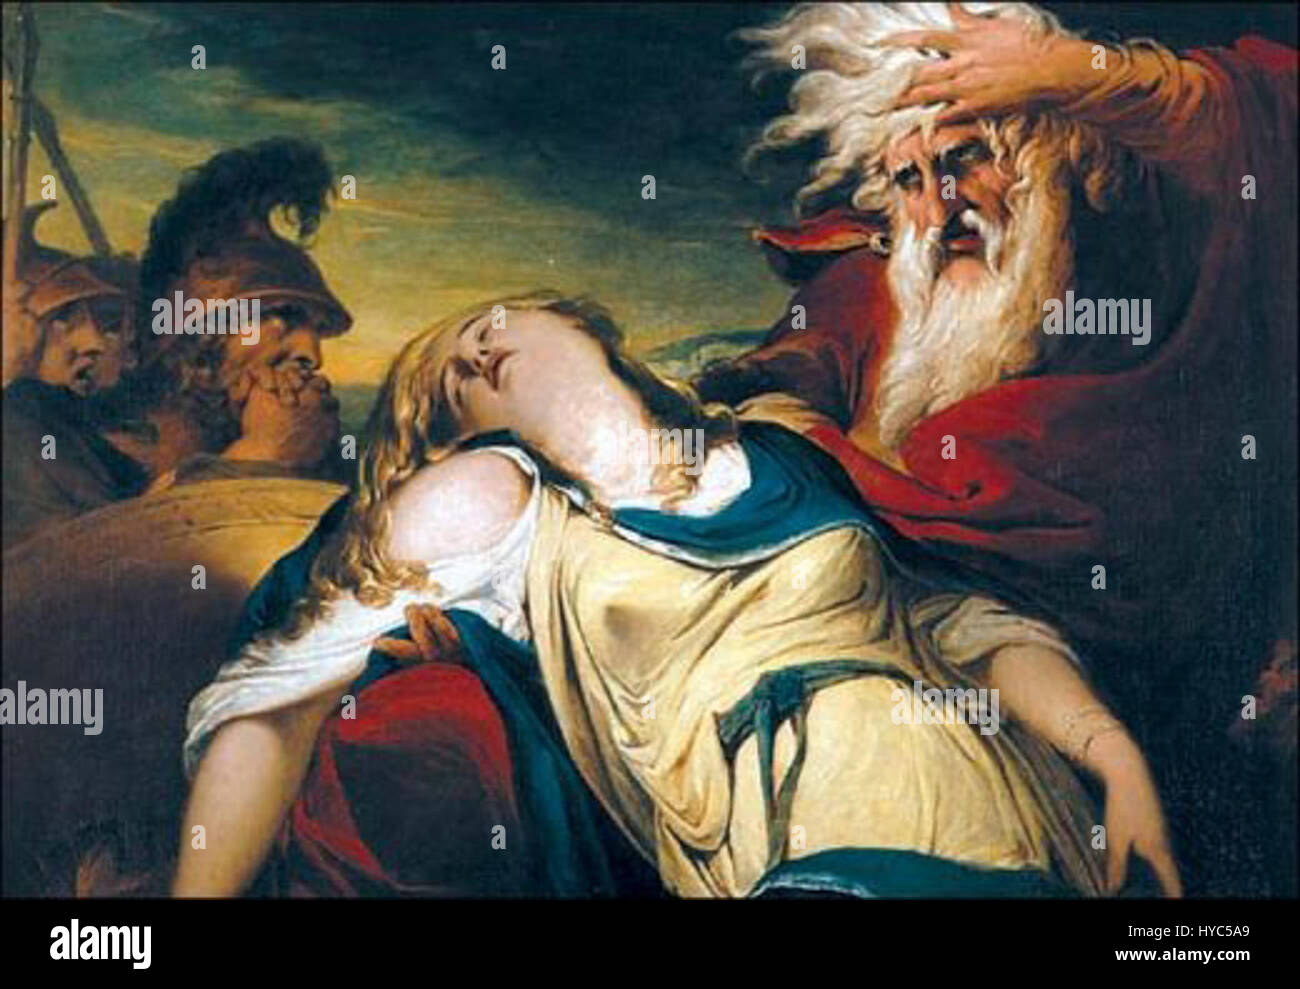 relationship between king lear and cordelia